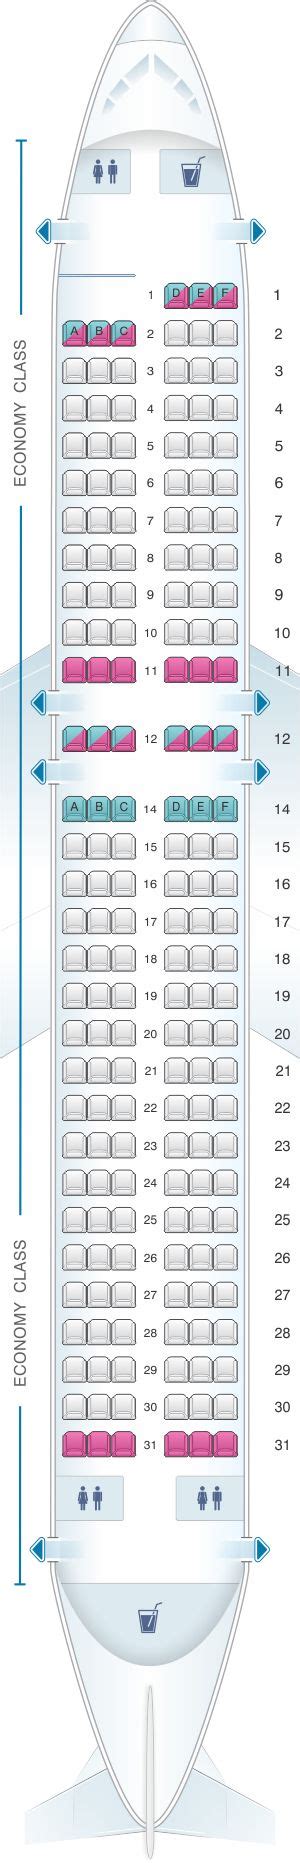 Seating Chart For Allegiant Airlines